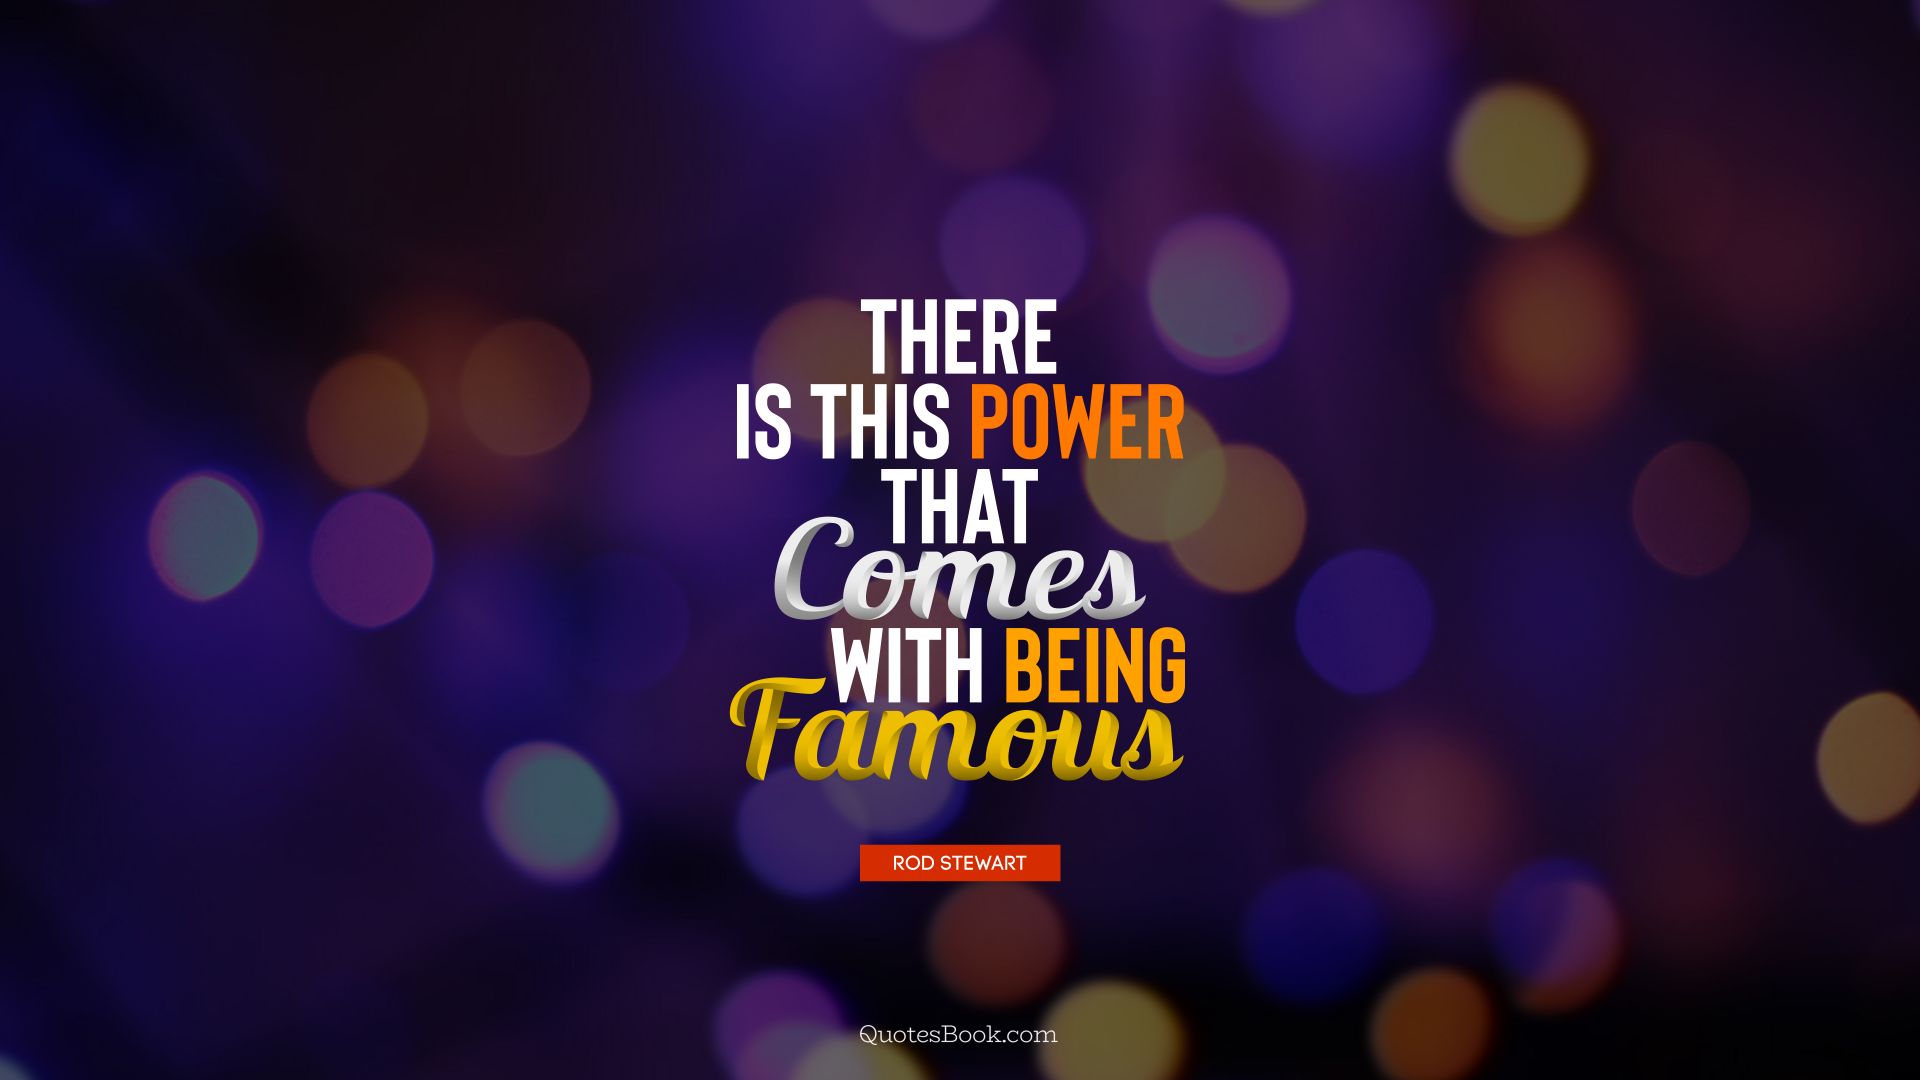 There is this power that comes with being famous. - Quote by Rod Stewart